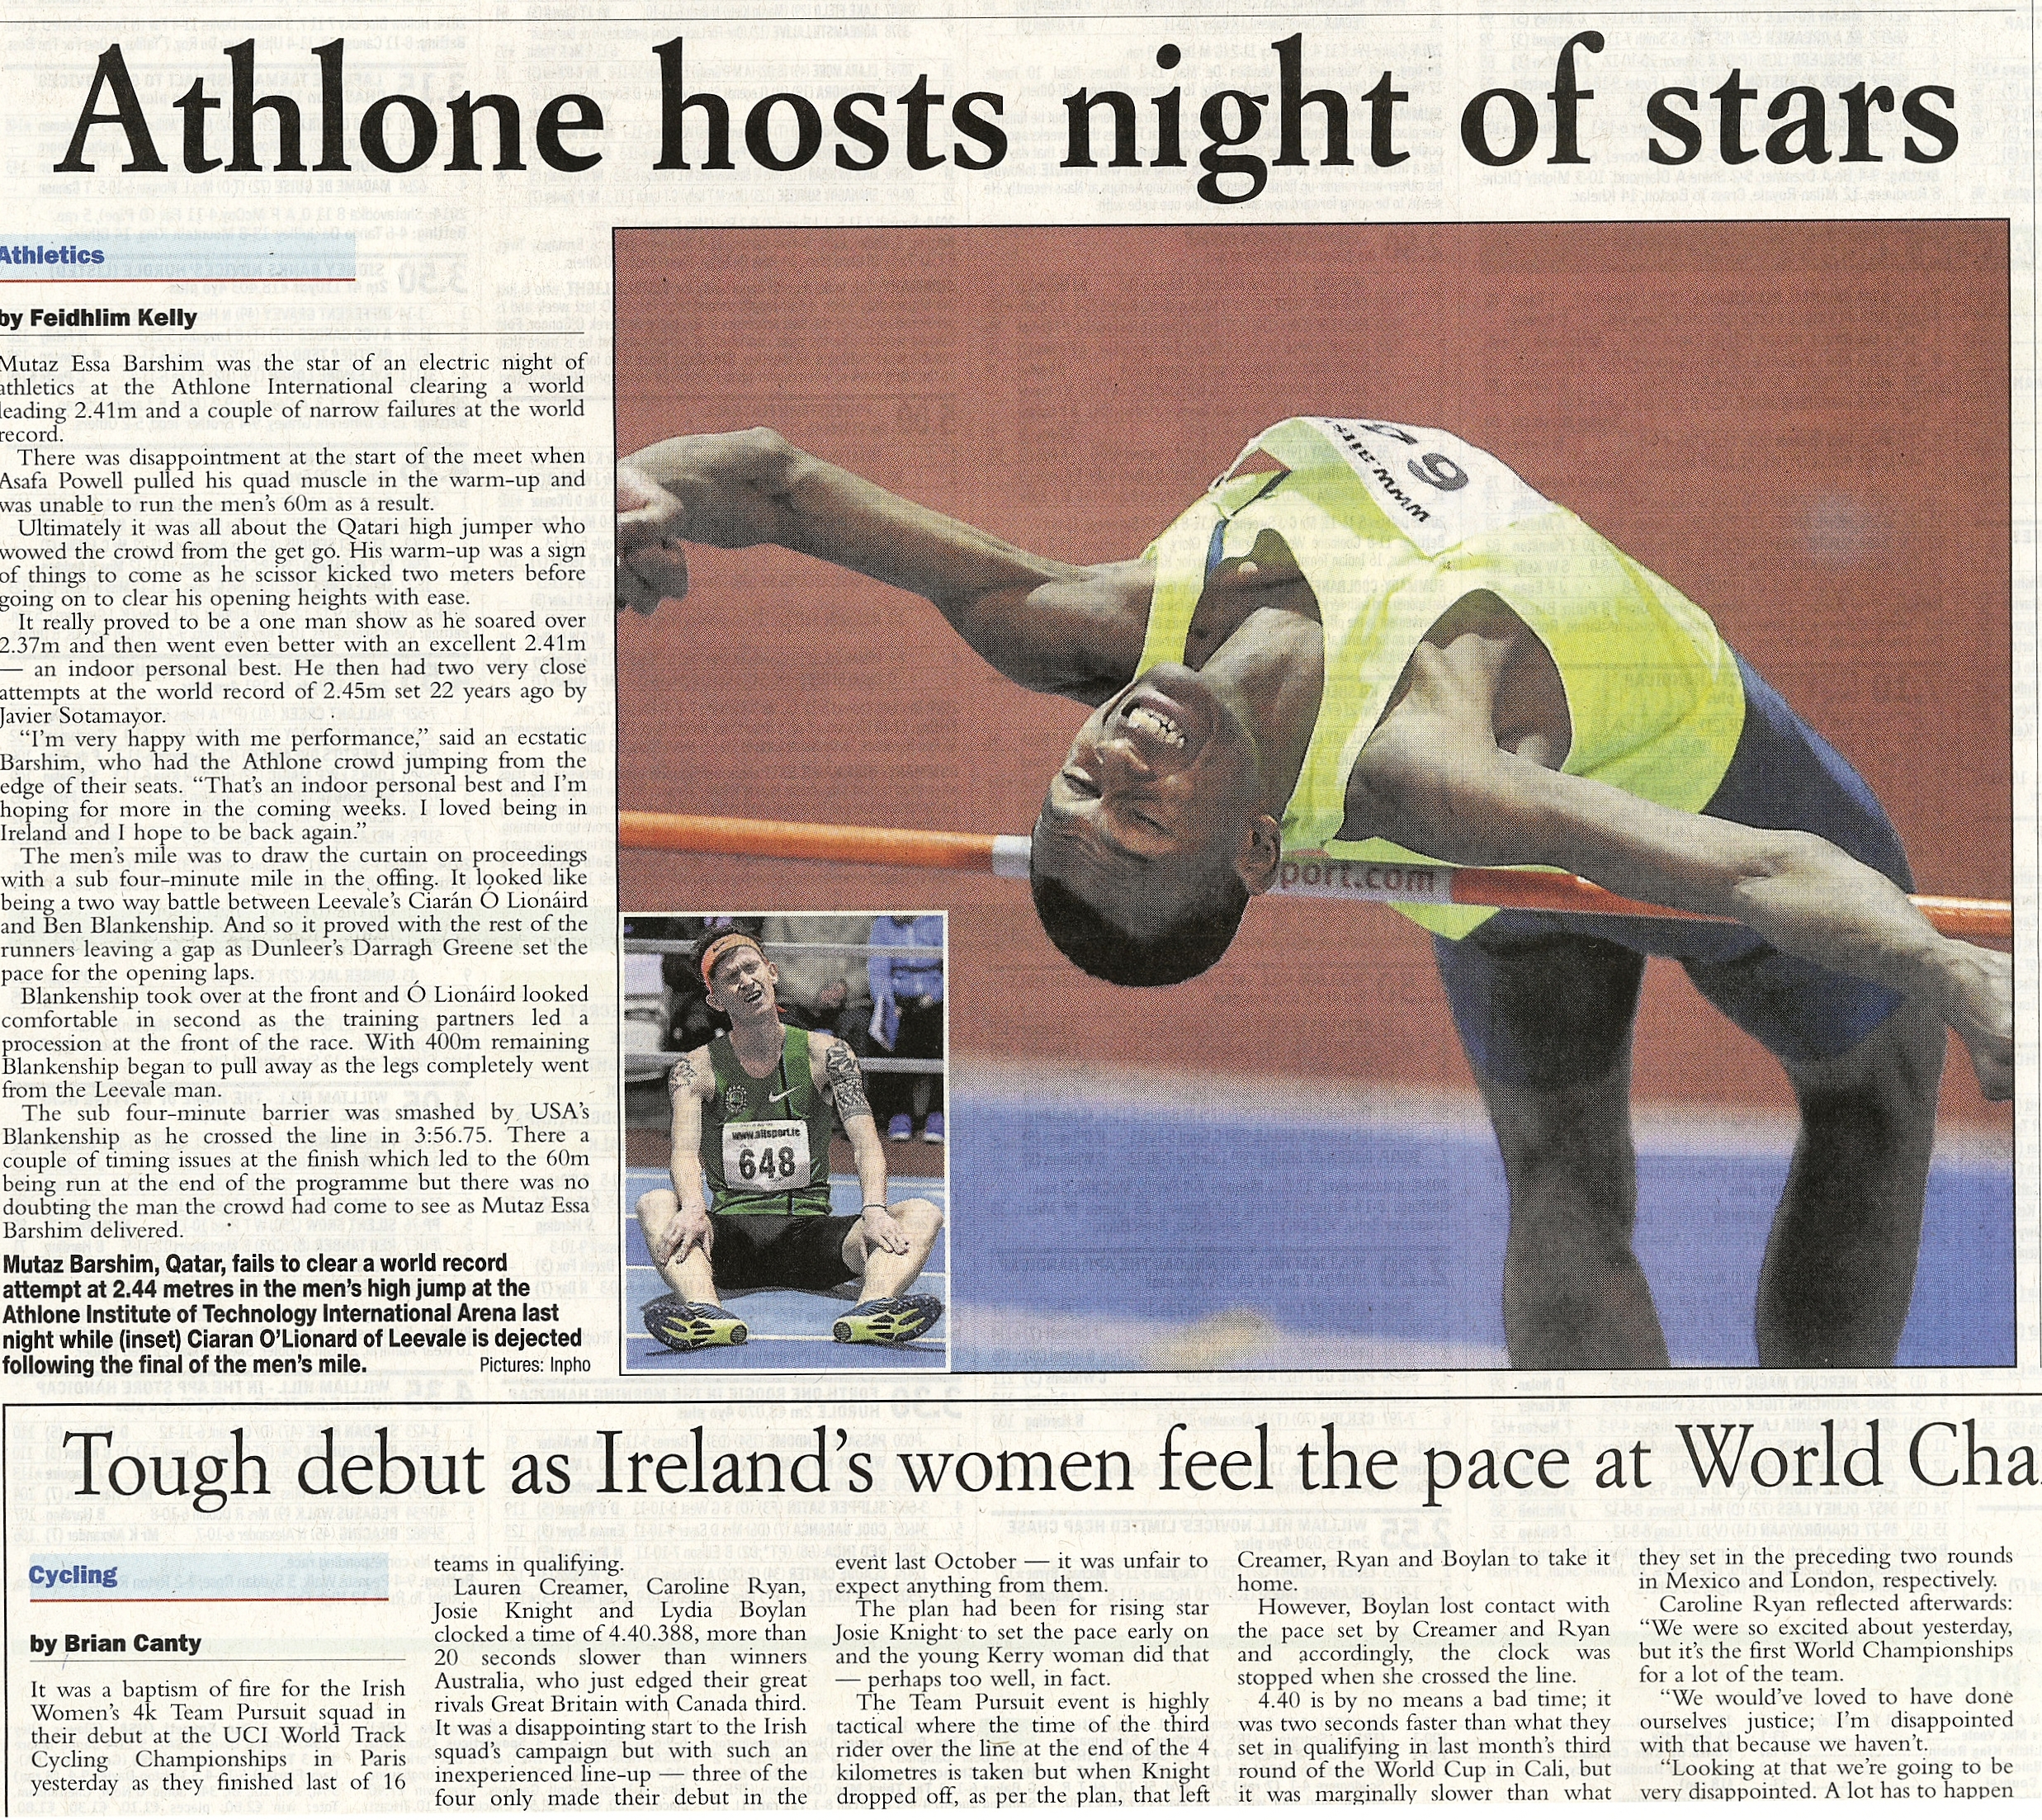  Mutaz Barshim of Qatar fails to clear a world record high jump attempt of 2.44 meters at Athlone IT February 19 2015  Irish Examiner  